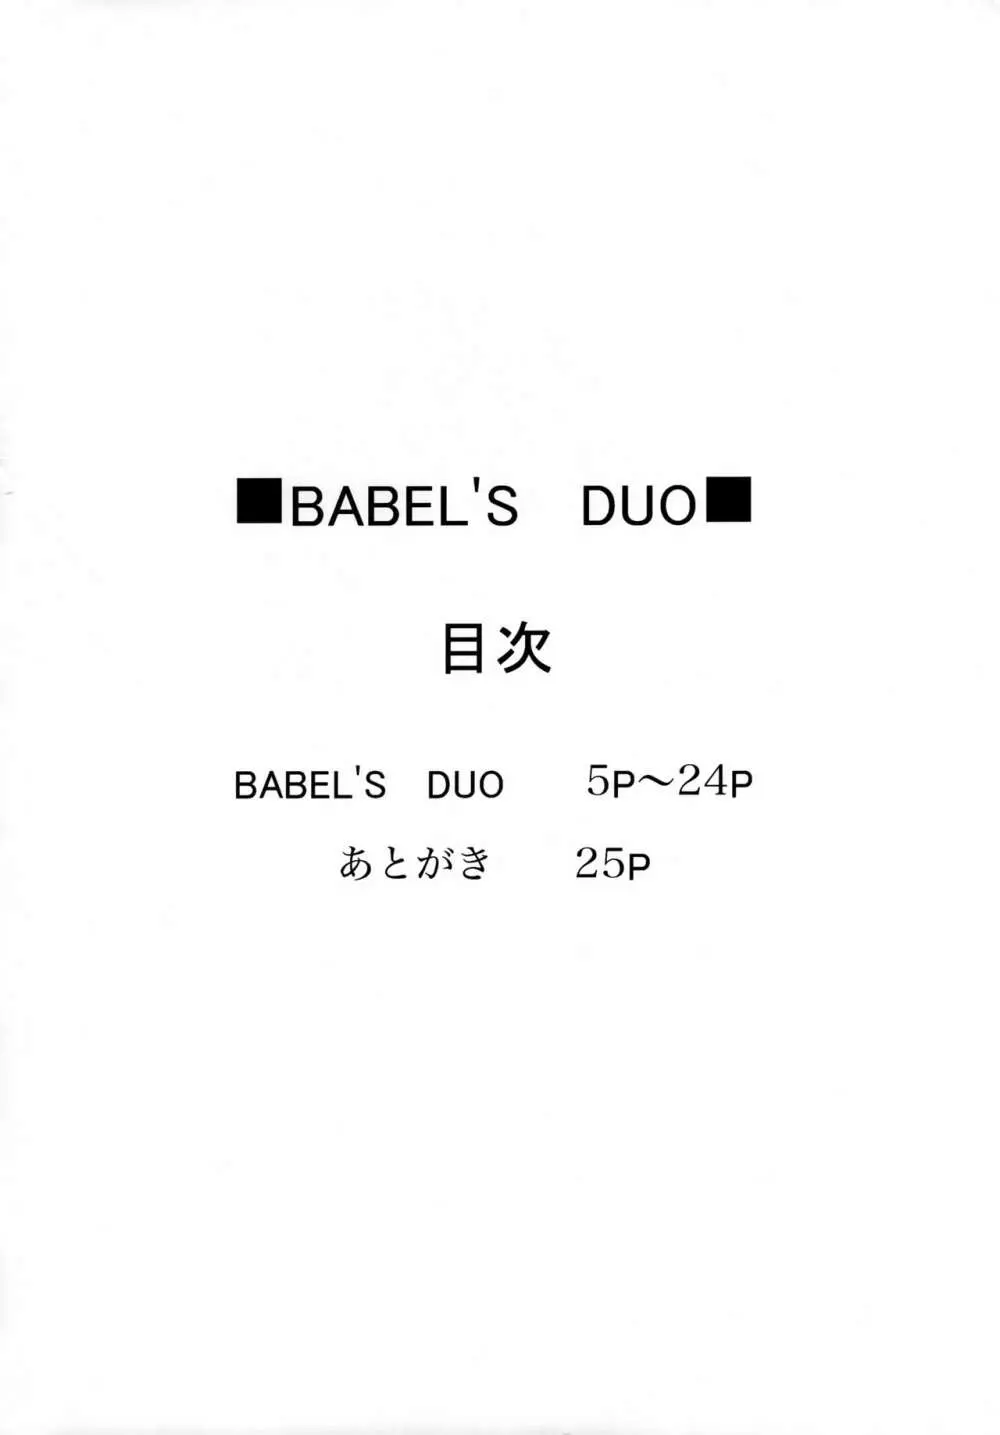 BABEL’S DUO - page3